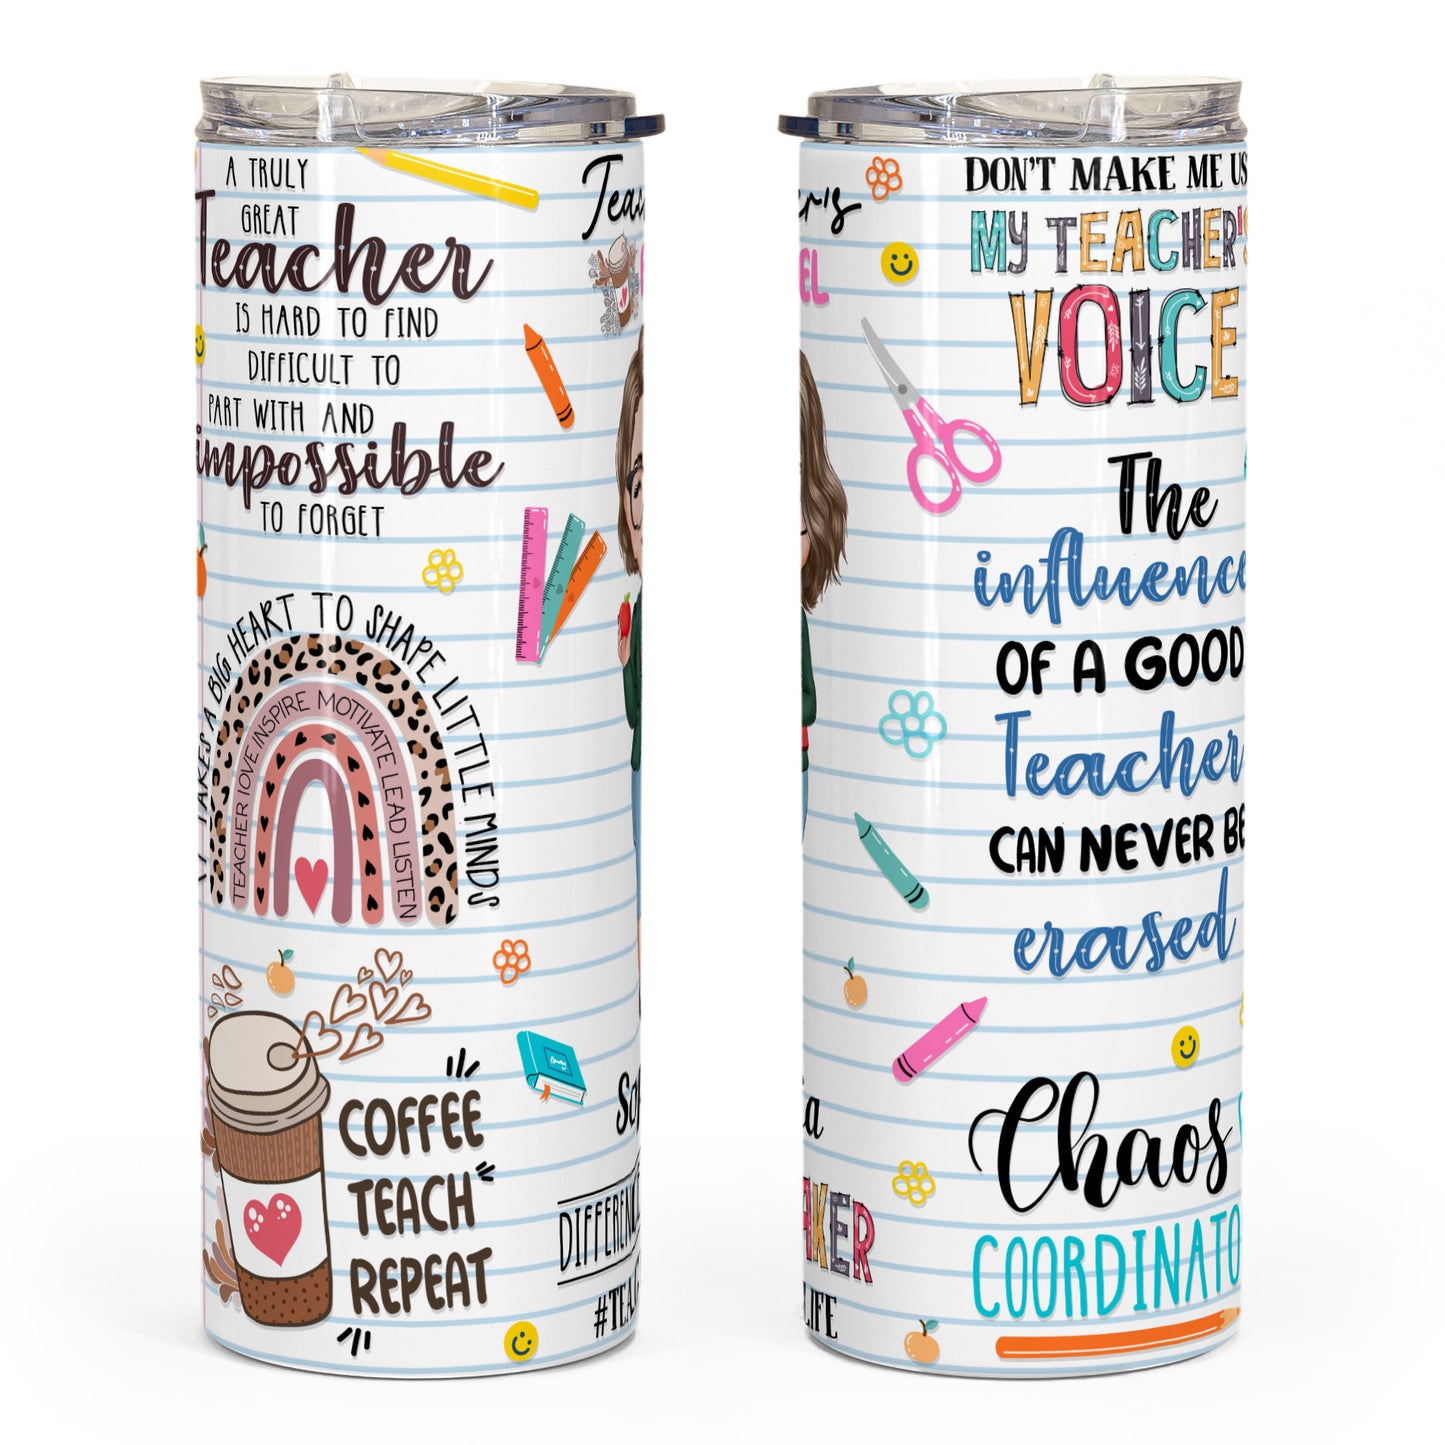 Teacher Fuel - Personalized Skinny Tumbler - Birthday, Thank You, Year End, School Leaving Gift For Teachers, Coworkers, Colleagues, Teacher Assistant